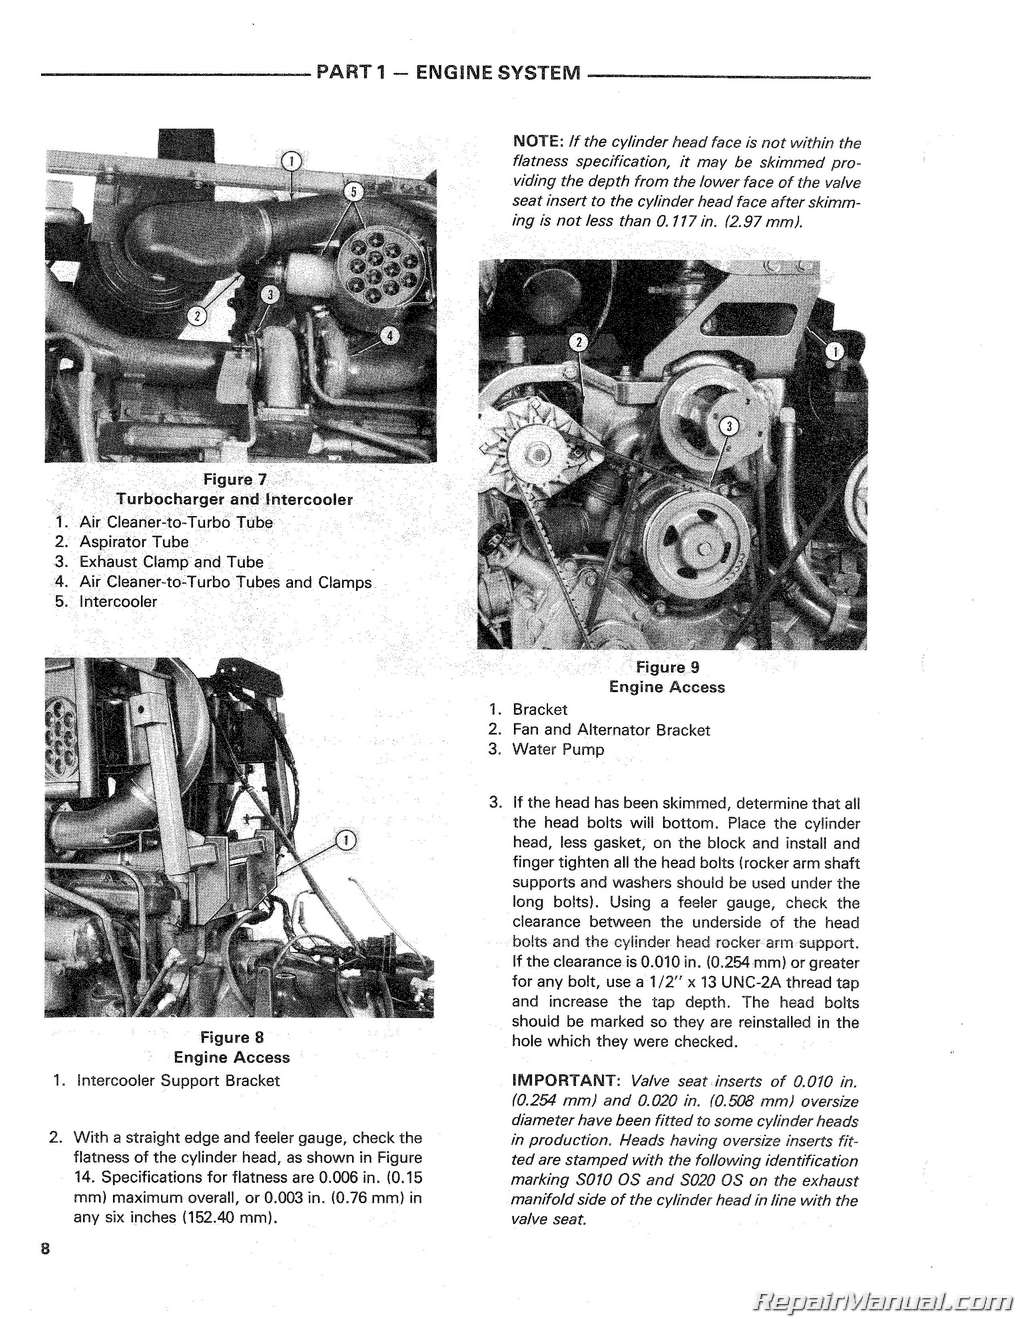 Details about   Operators Manual 1978-1970 Ford TW 10 TW 20 Tractor